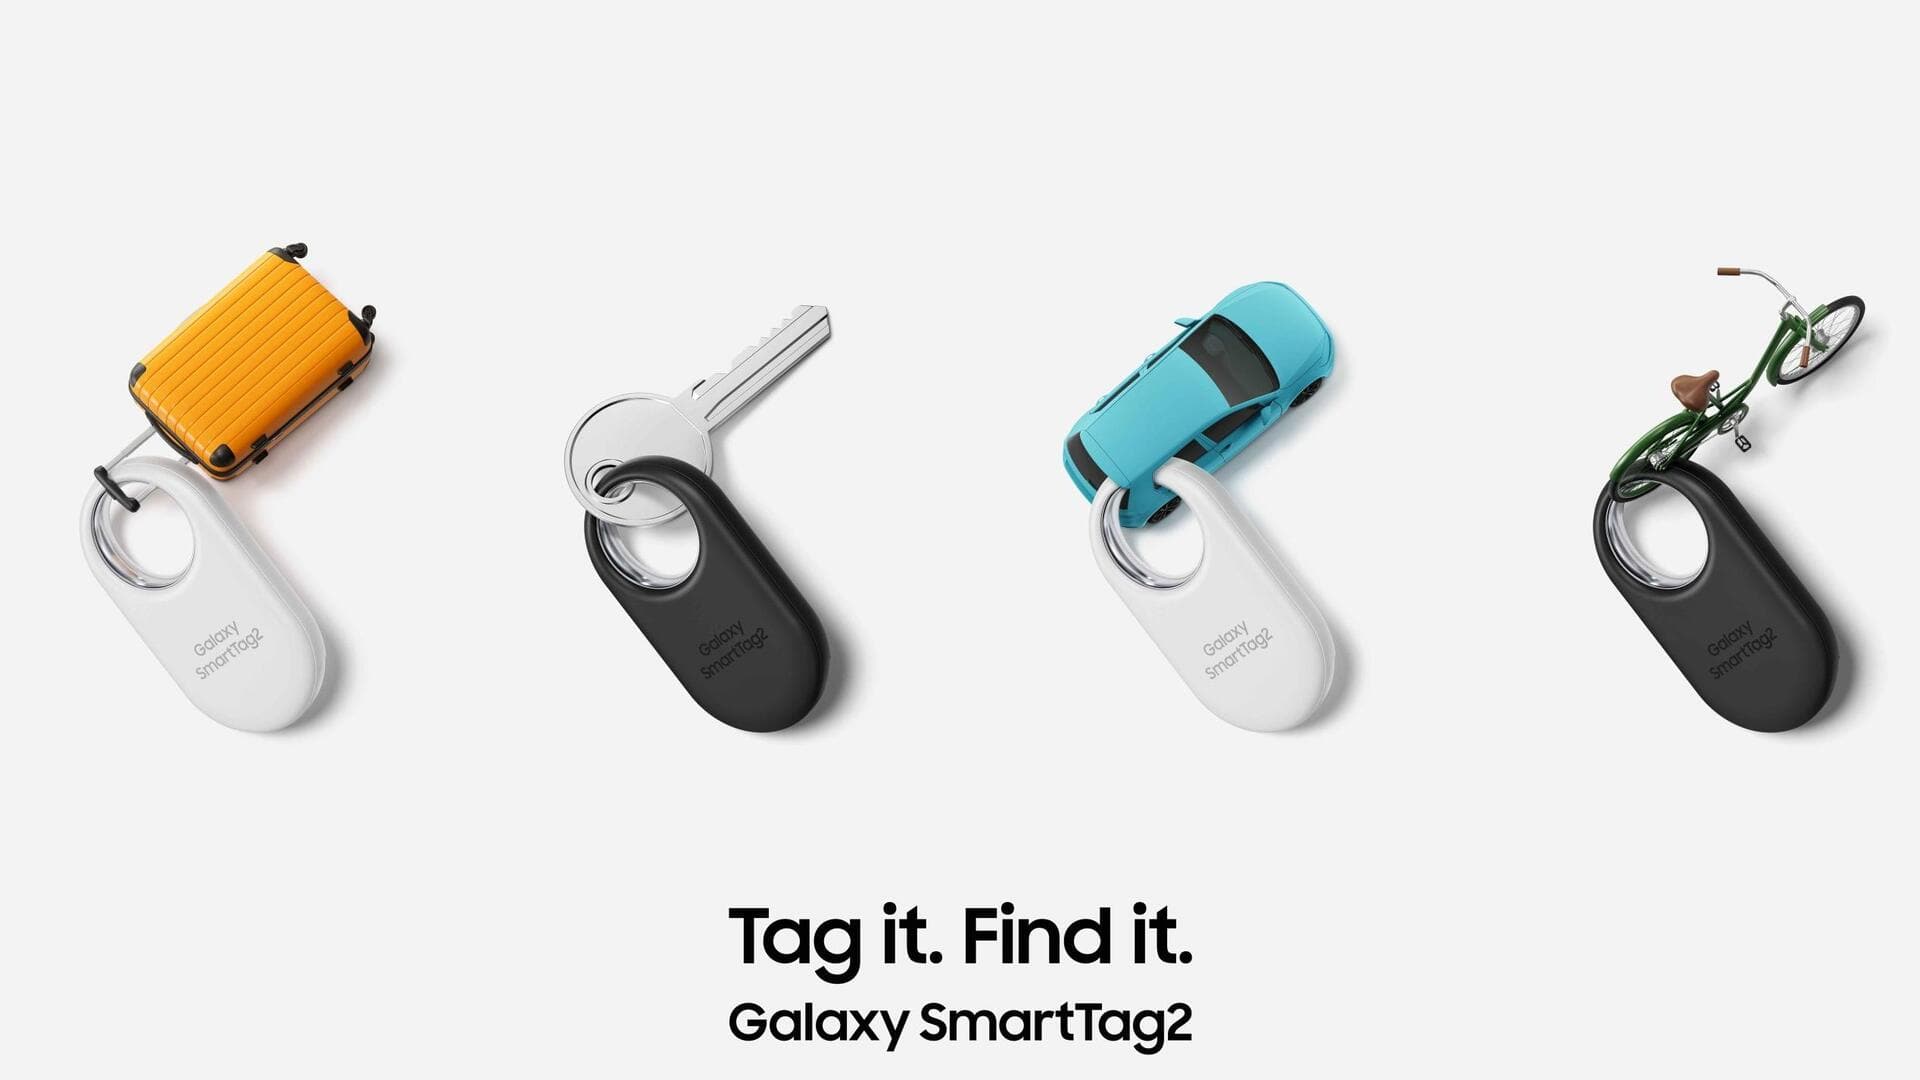 Samsung unveils Galaxy SmartTag2 with enhanced design, features, and battery